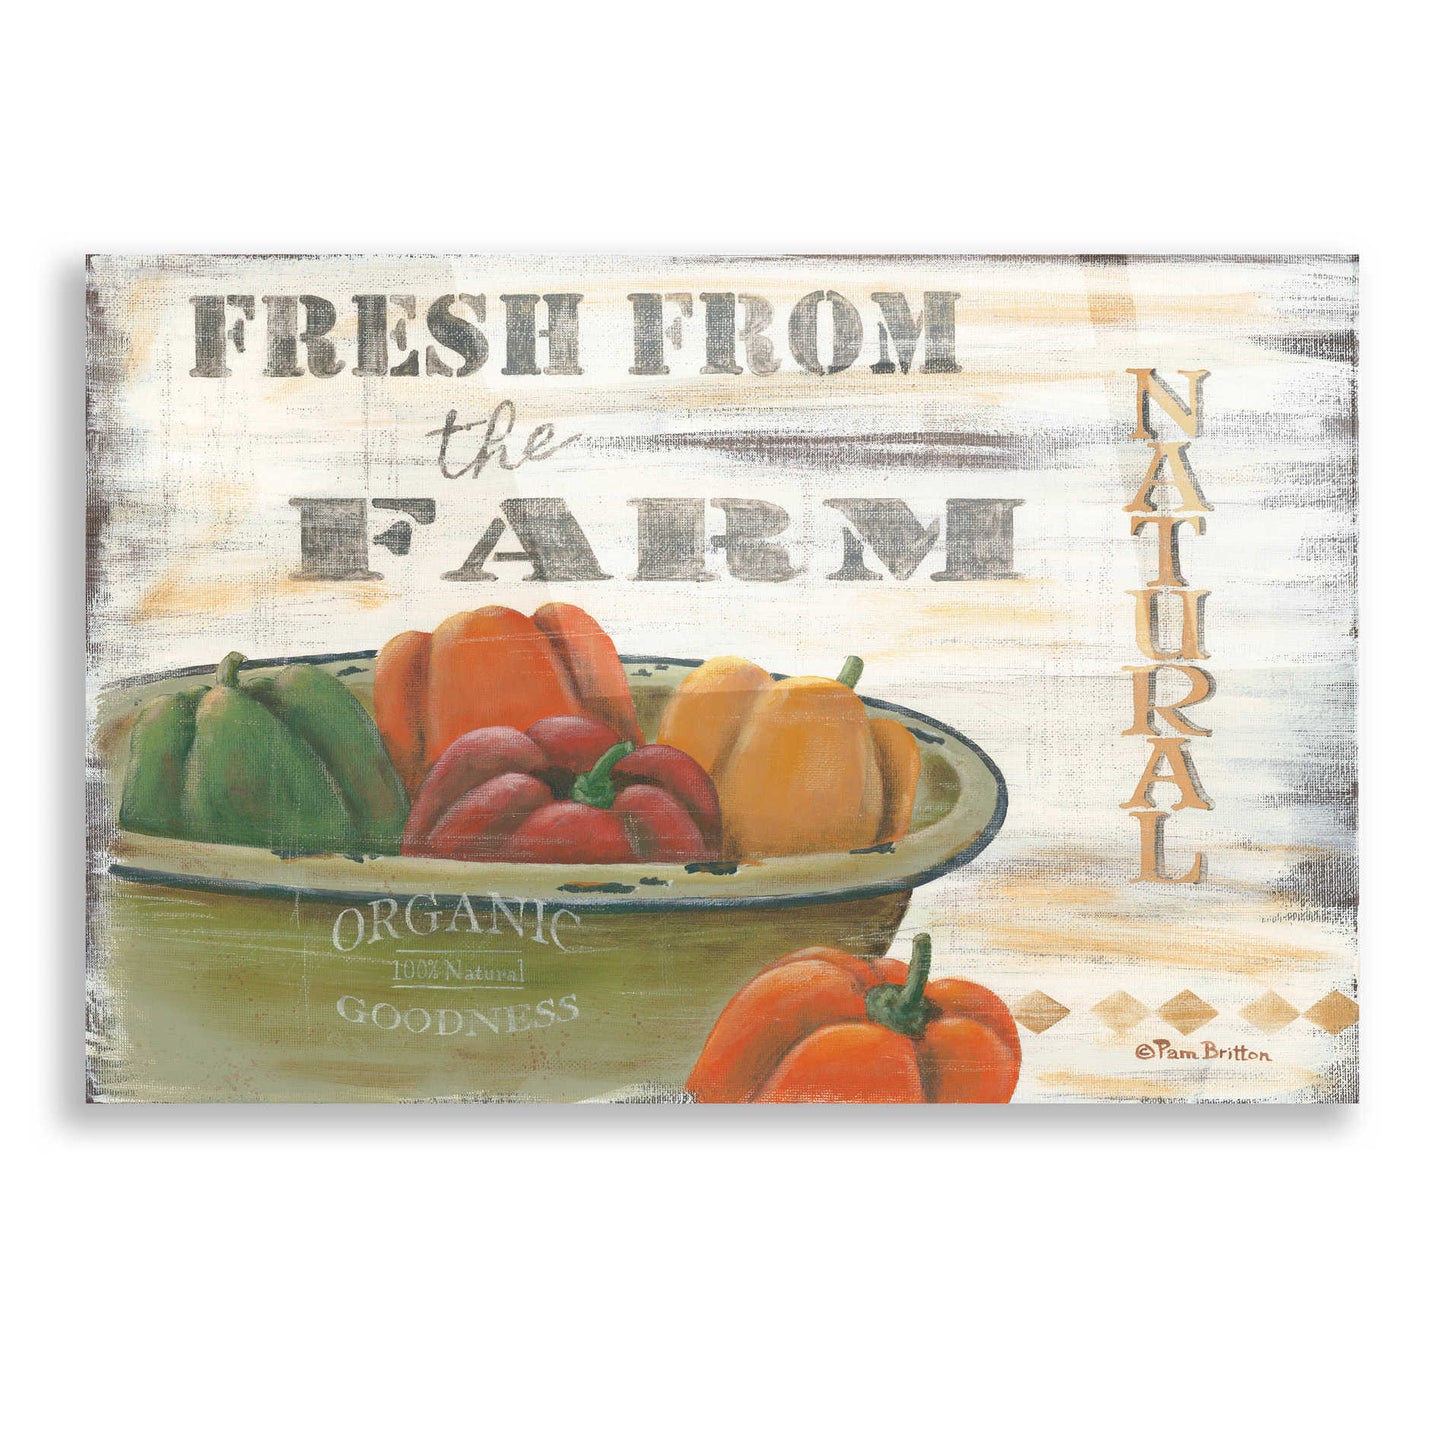 Epic Art 'Fresn From the Farm, Natural' by Pam Britton, Acrylic Glass Wall Art,16x12